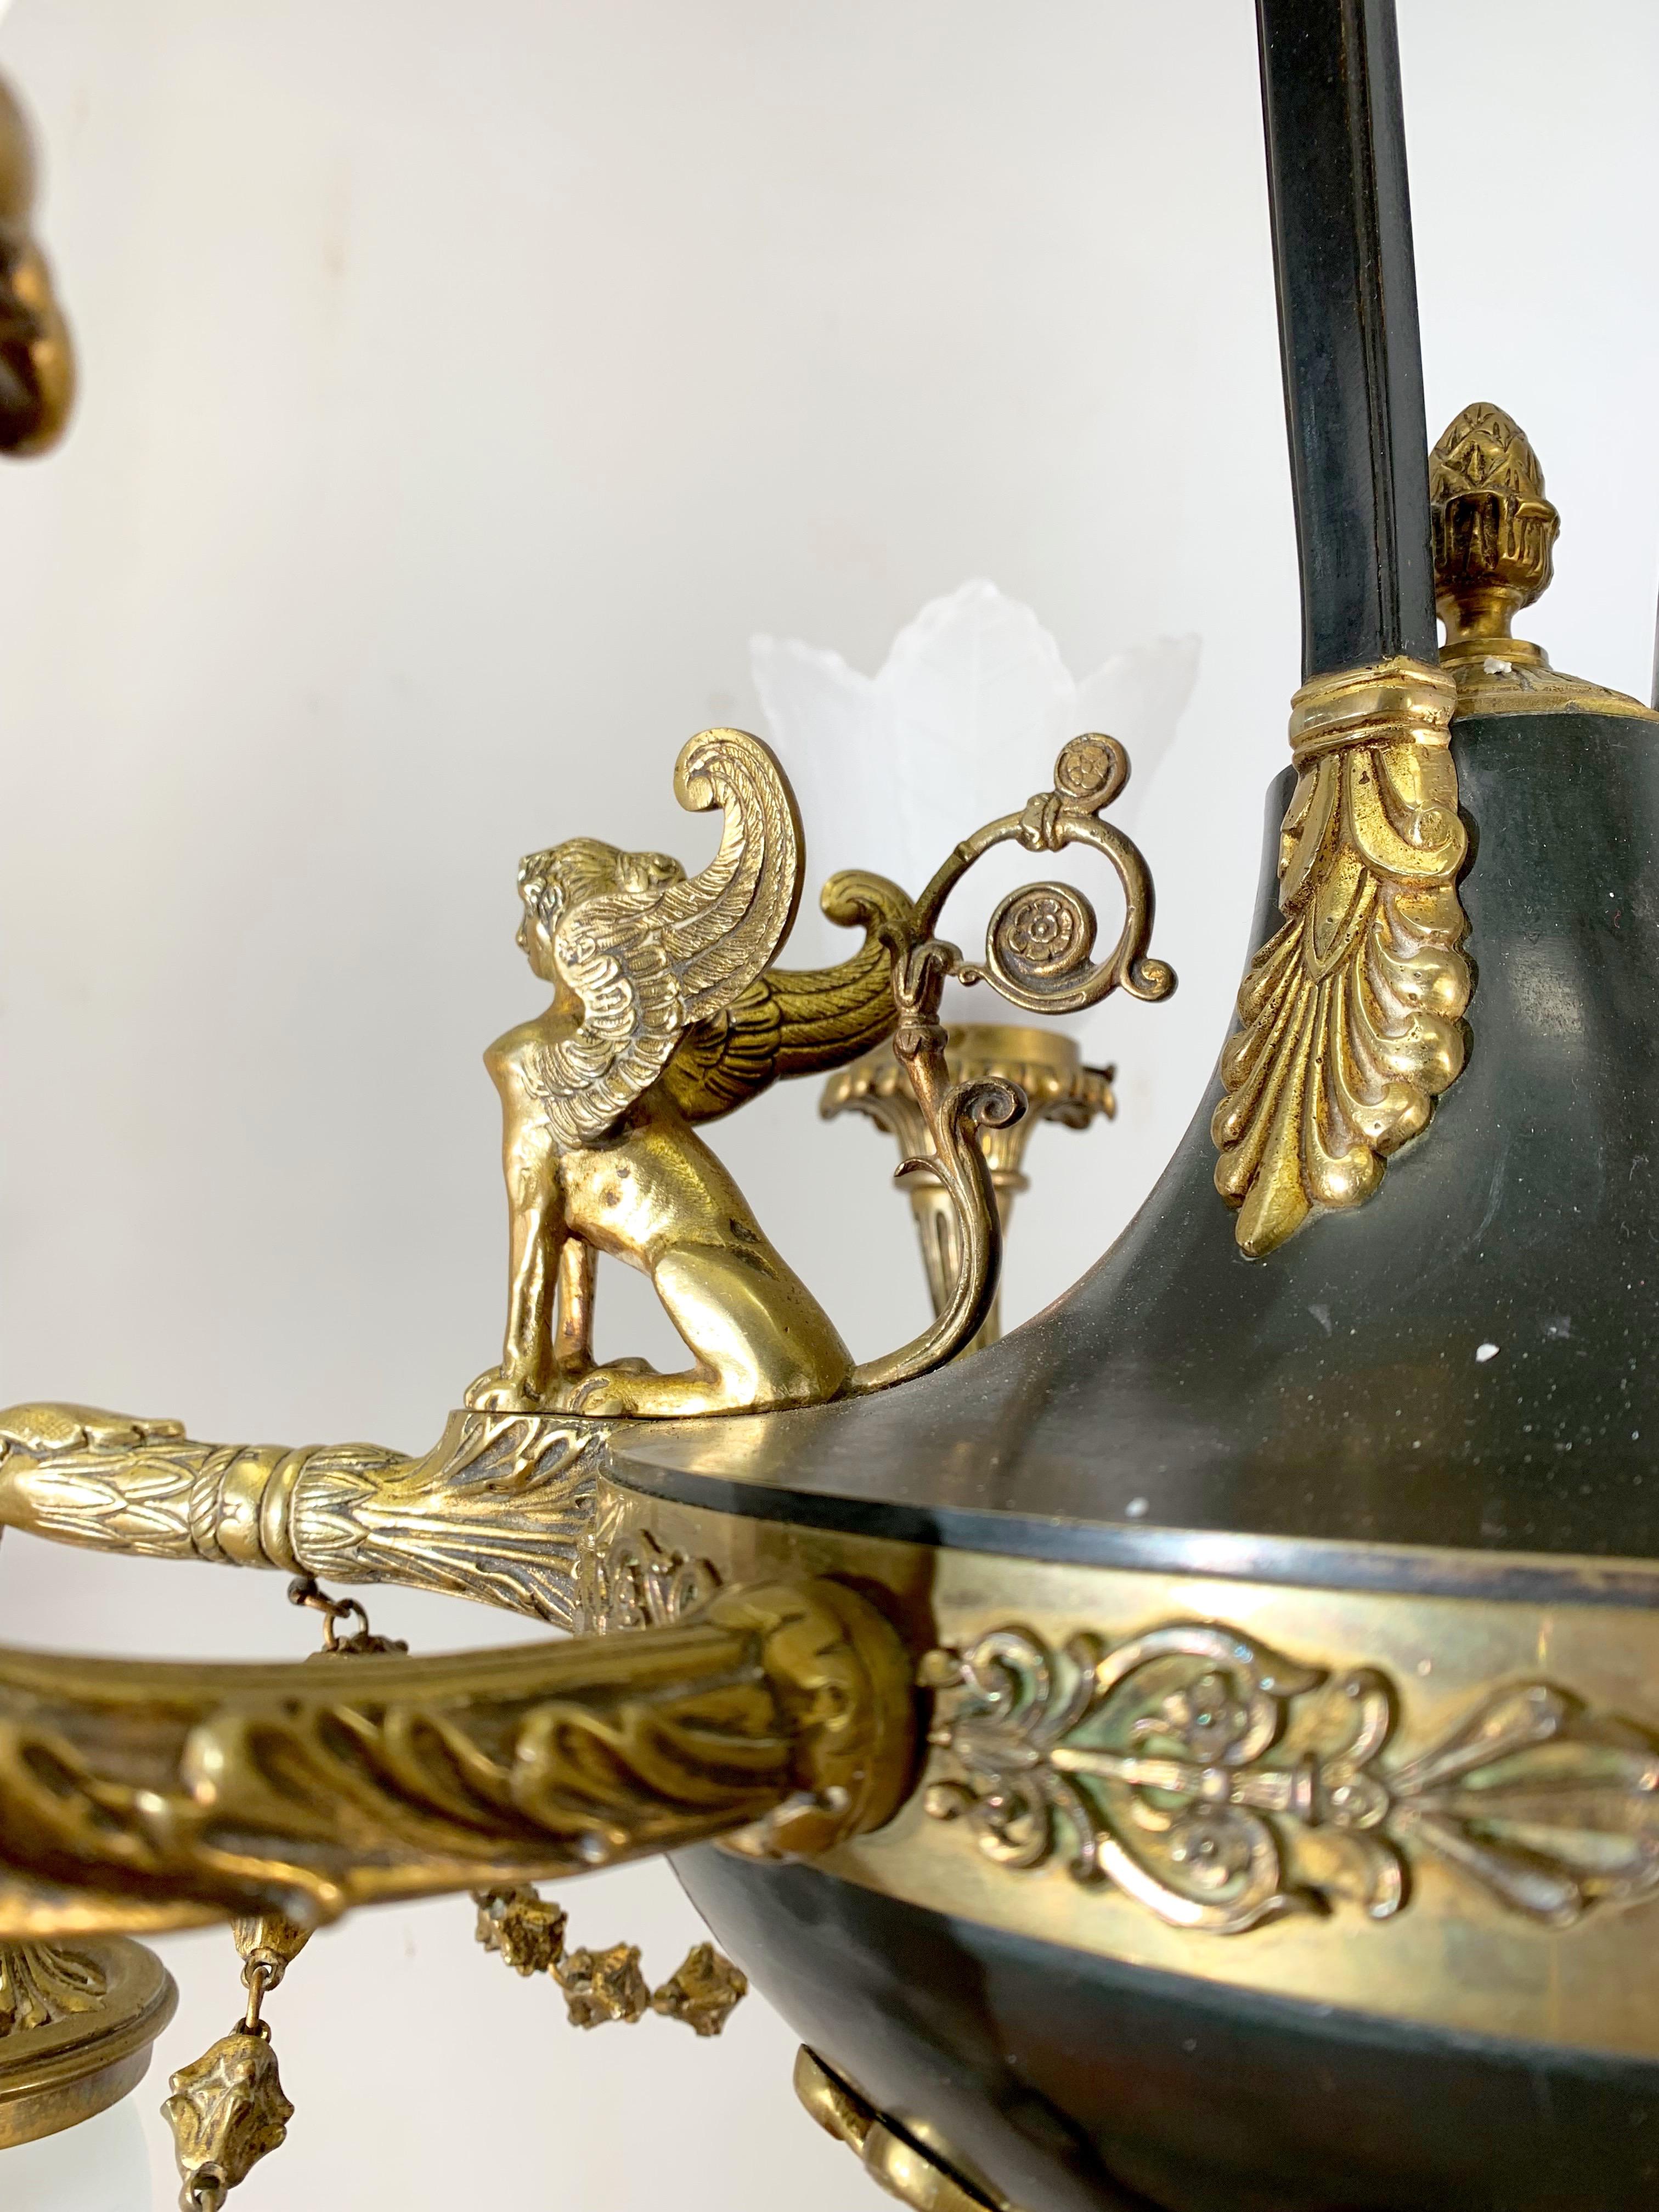 Metal Antique French Empire Style Gilt Bronze Chandelier with Sphinx & Eagle Sculpture